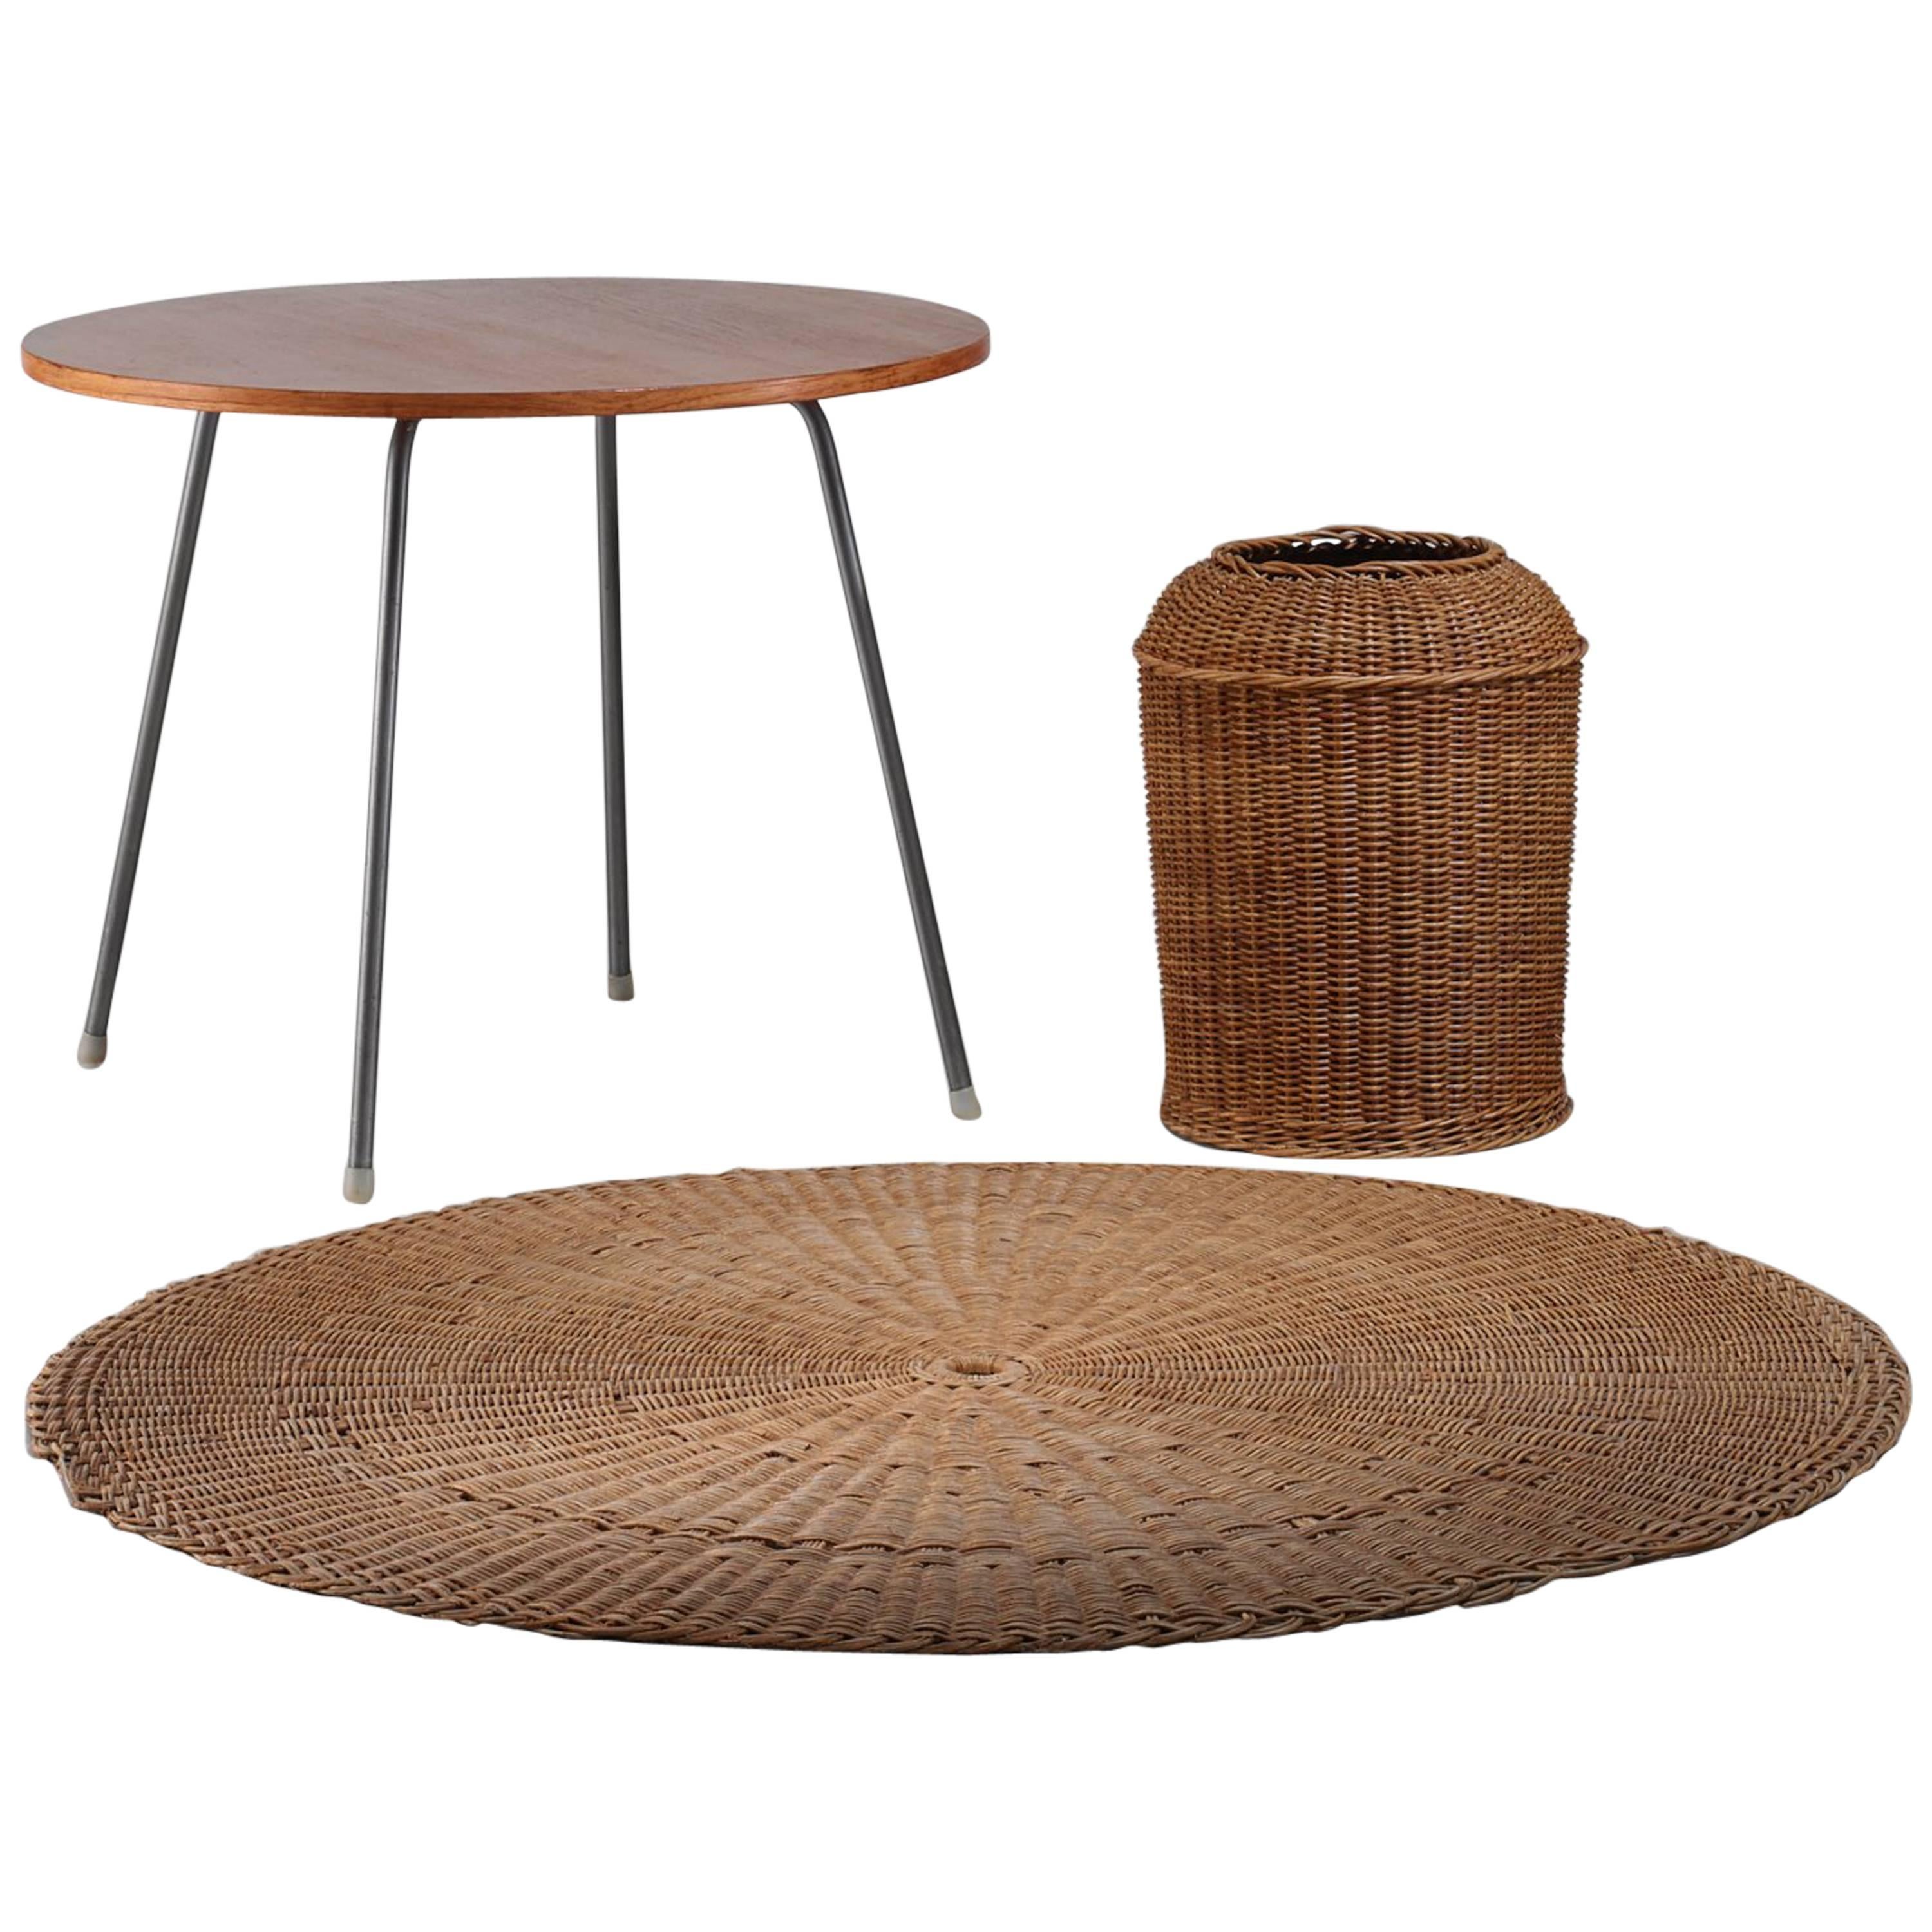 Egon Eiermann Table with Wicker Basket and Floor Mat, Germany, circa 1950 For Sale